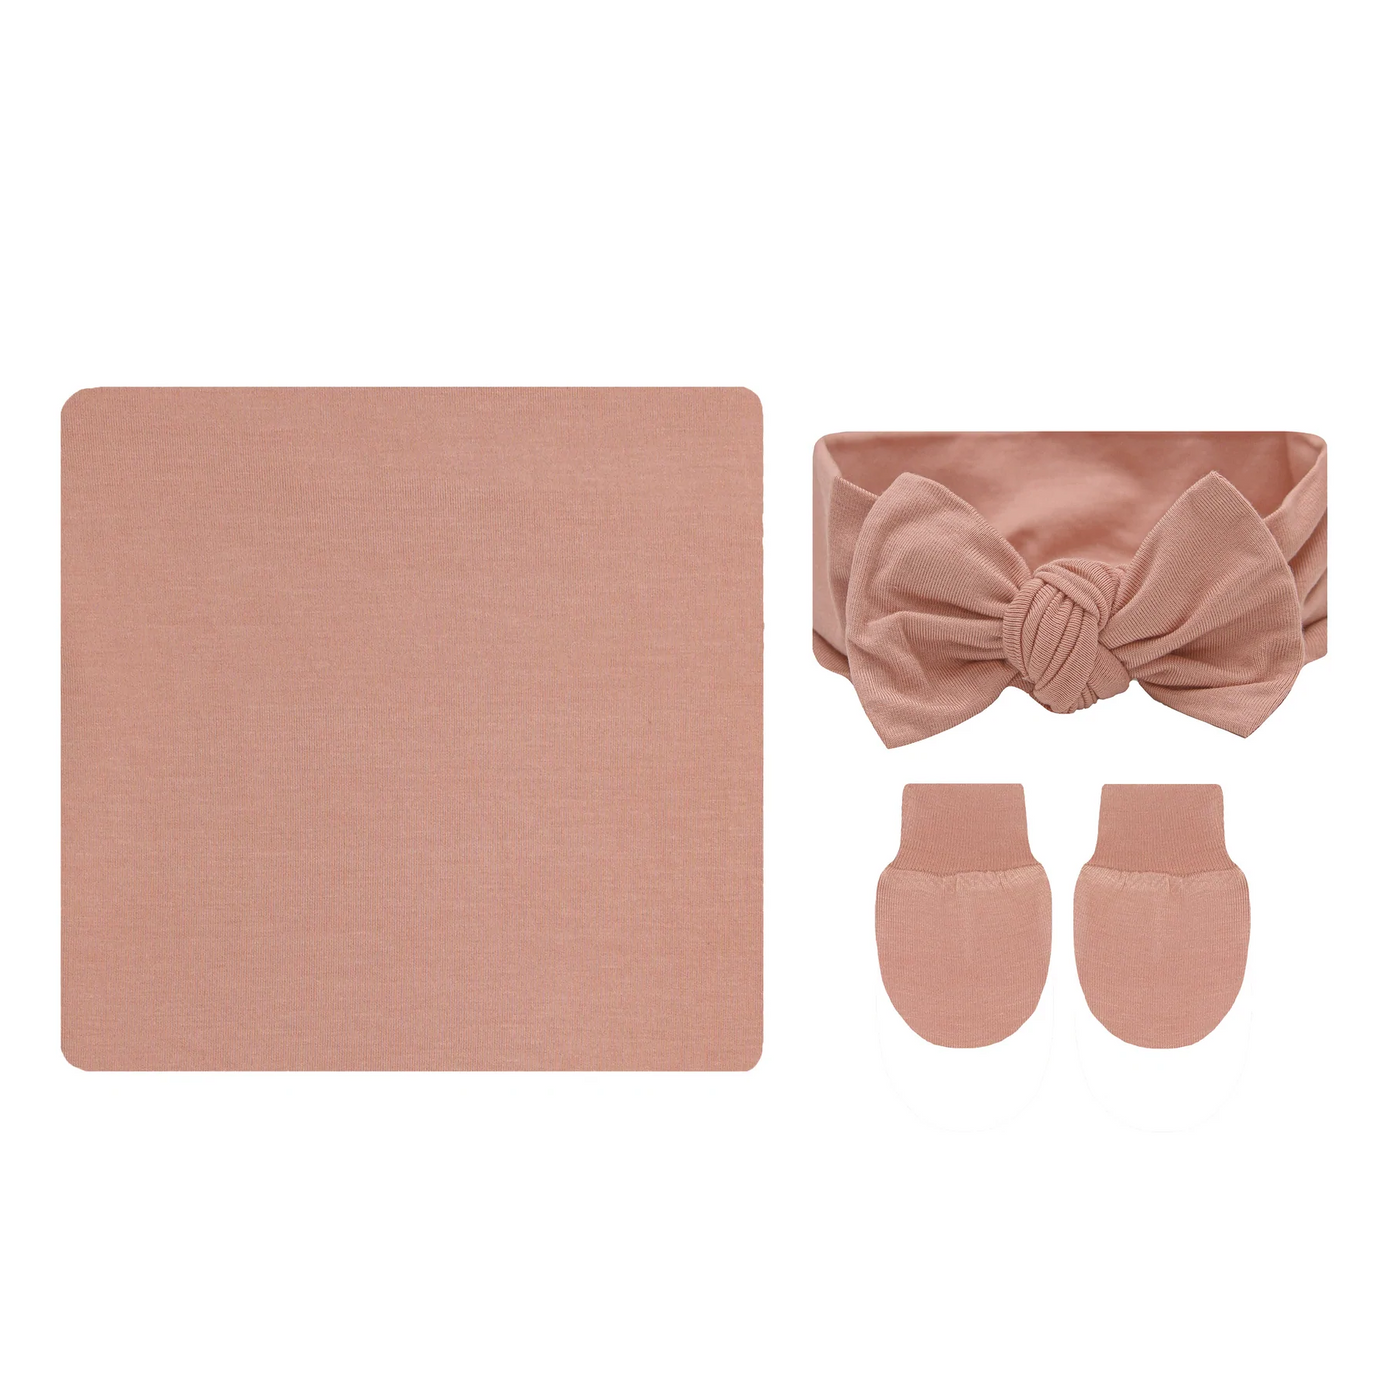 Lou Lou and Company Essential Newborn Bundle with Headband: Blakely